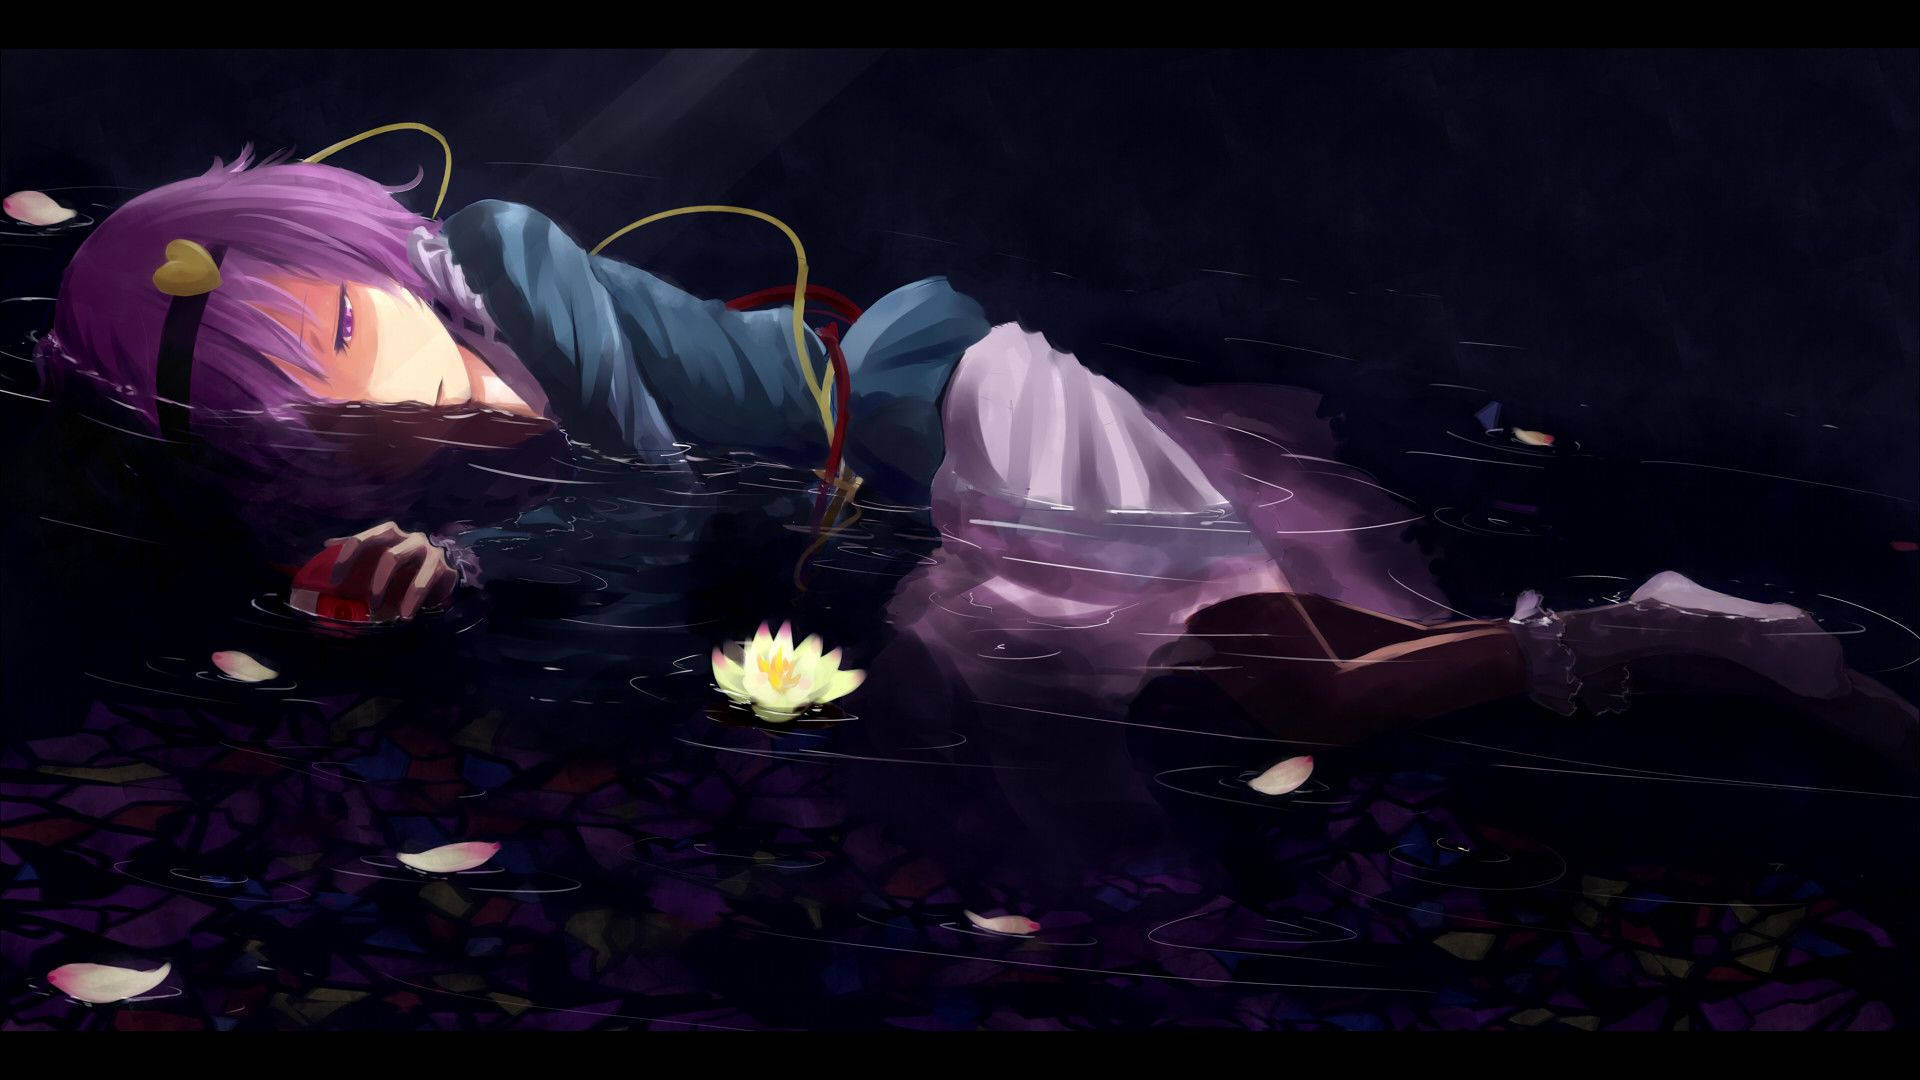 Anime Girl Sad Alone On Water With Flowers